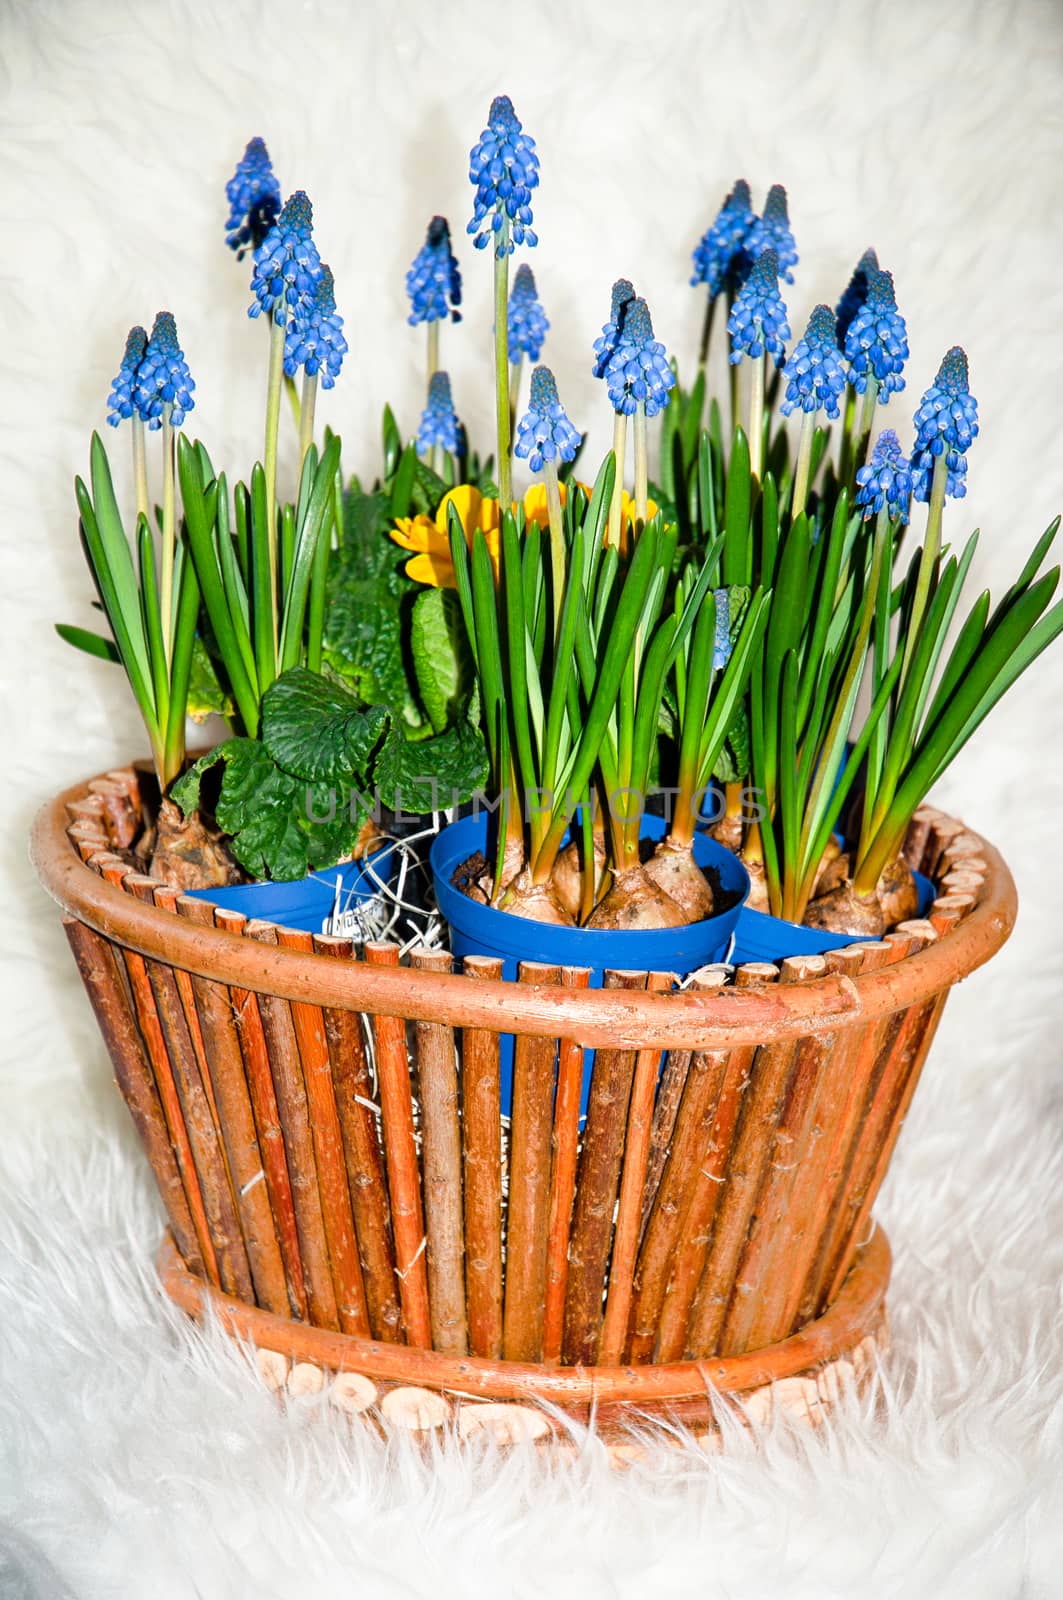 Hyacinths in a basket  . by LarisaP